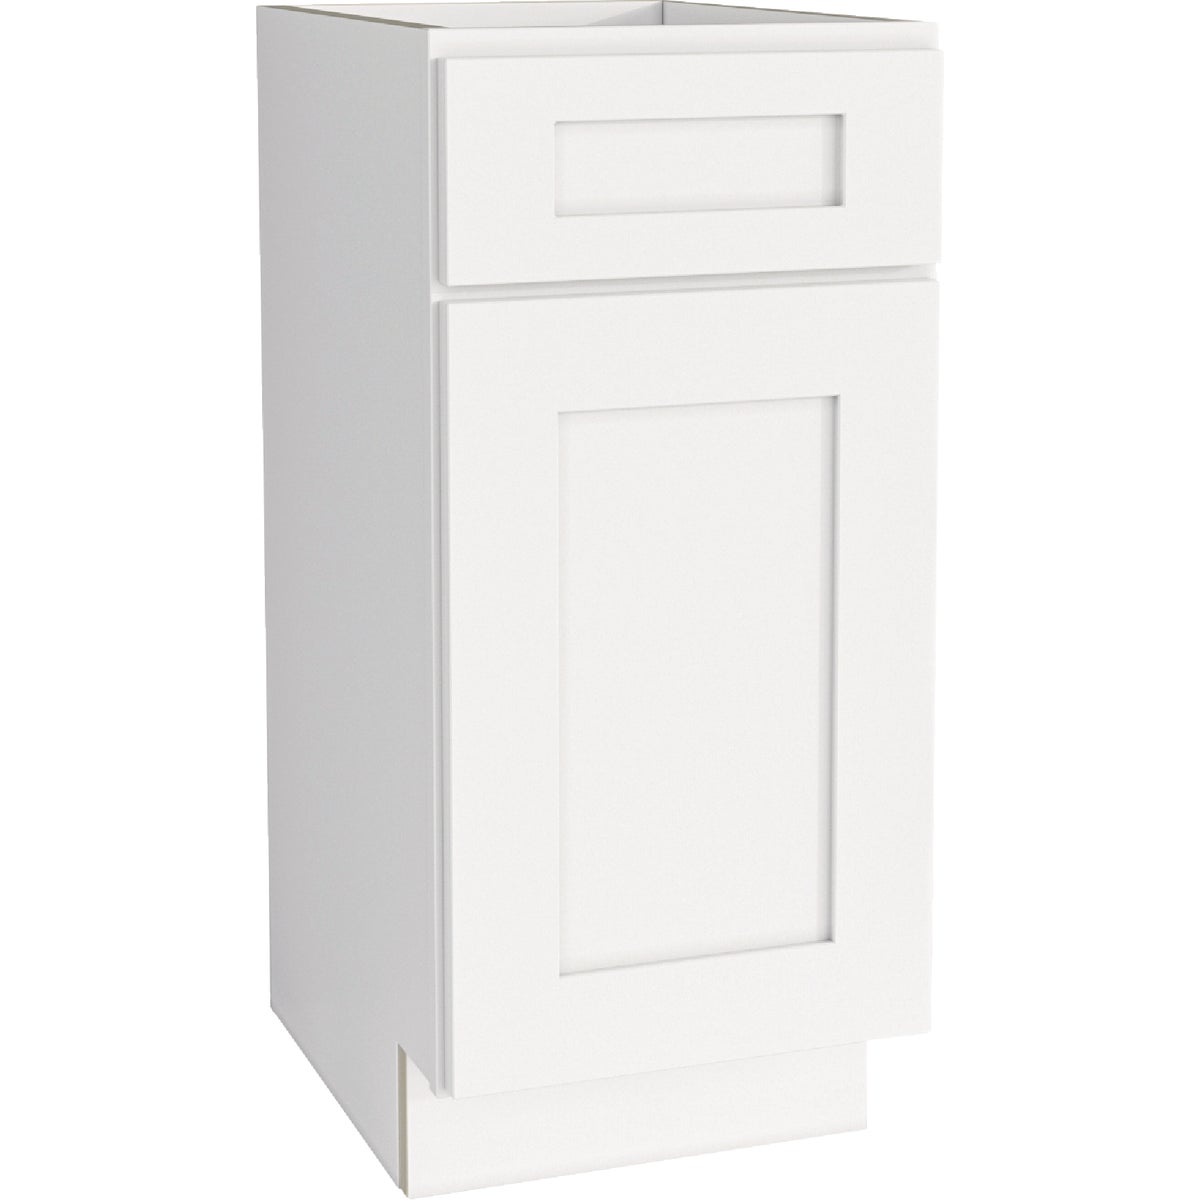 CraftMark Plymouth Shaker 15 In. W x 24 In. D x 34.5 In. H Ready To Assemble White Base Kitchen Cabinet